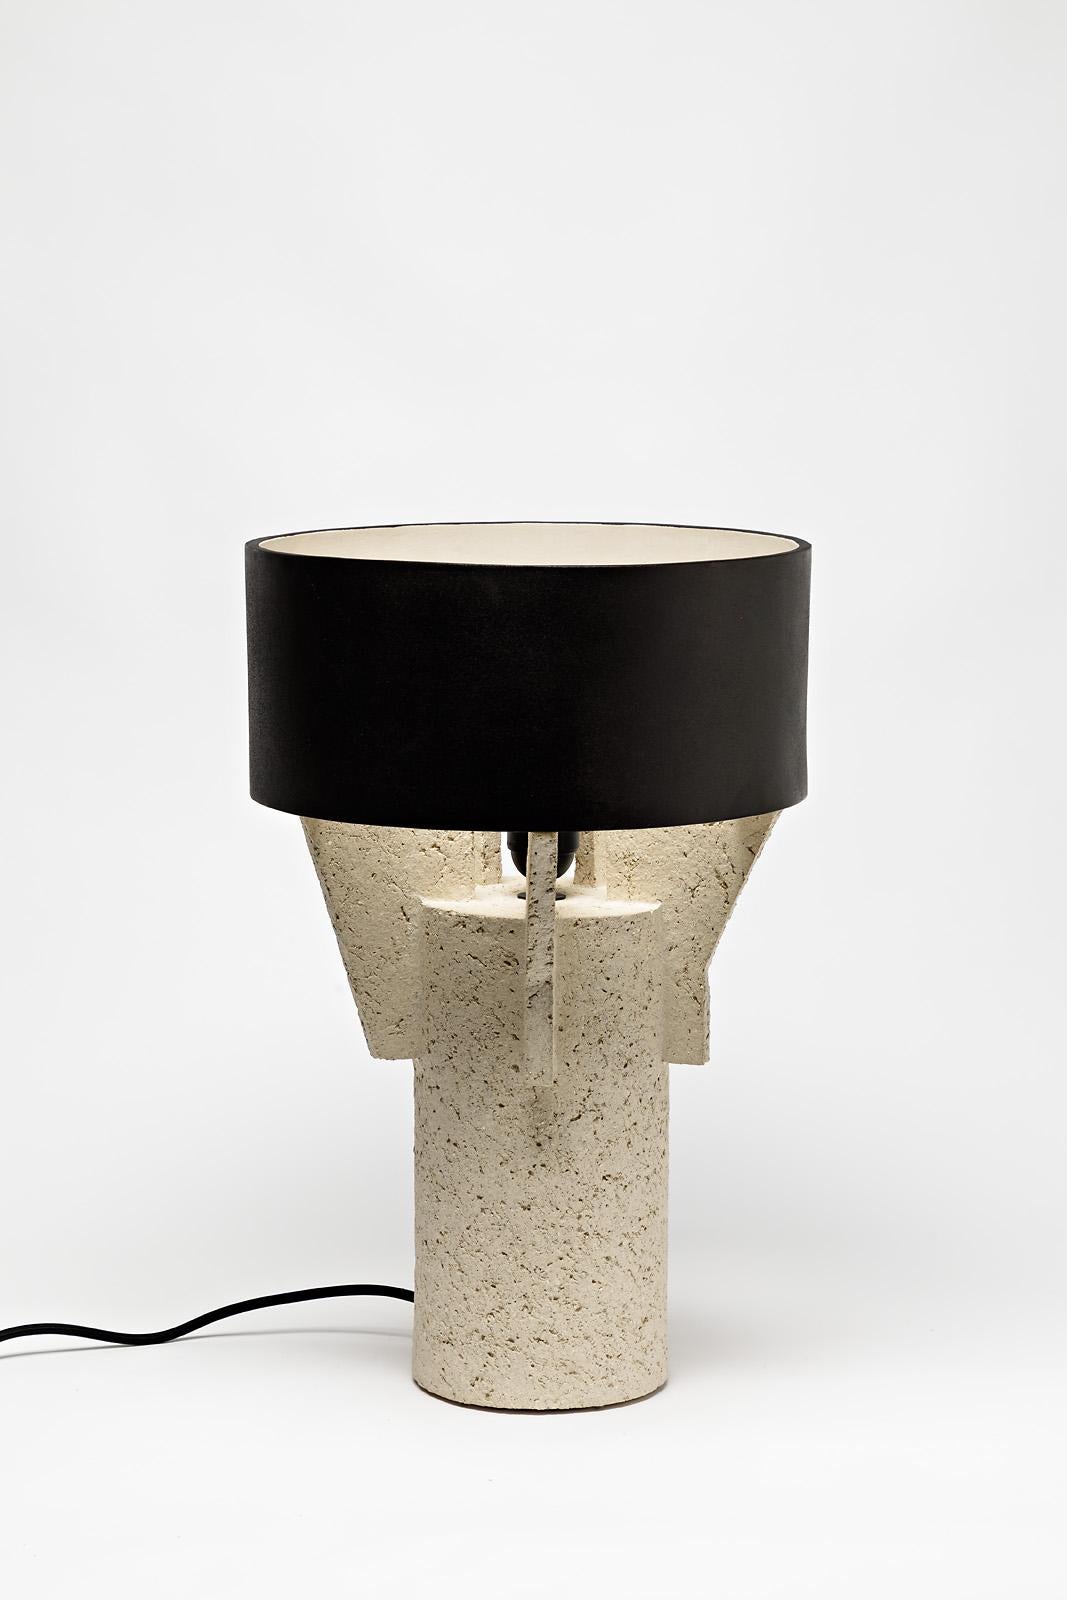 Beaux Arts Pair of Ceramic Table Lamps by Denis Castaing with Brown Glaze, 2019